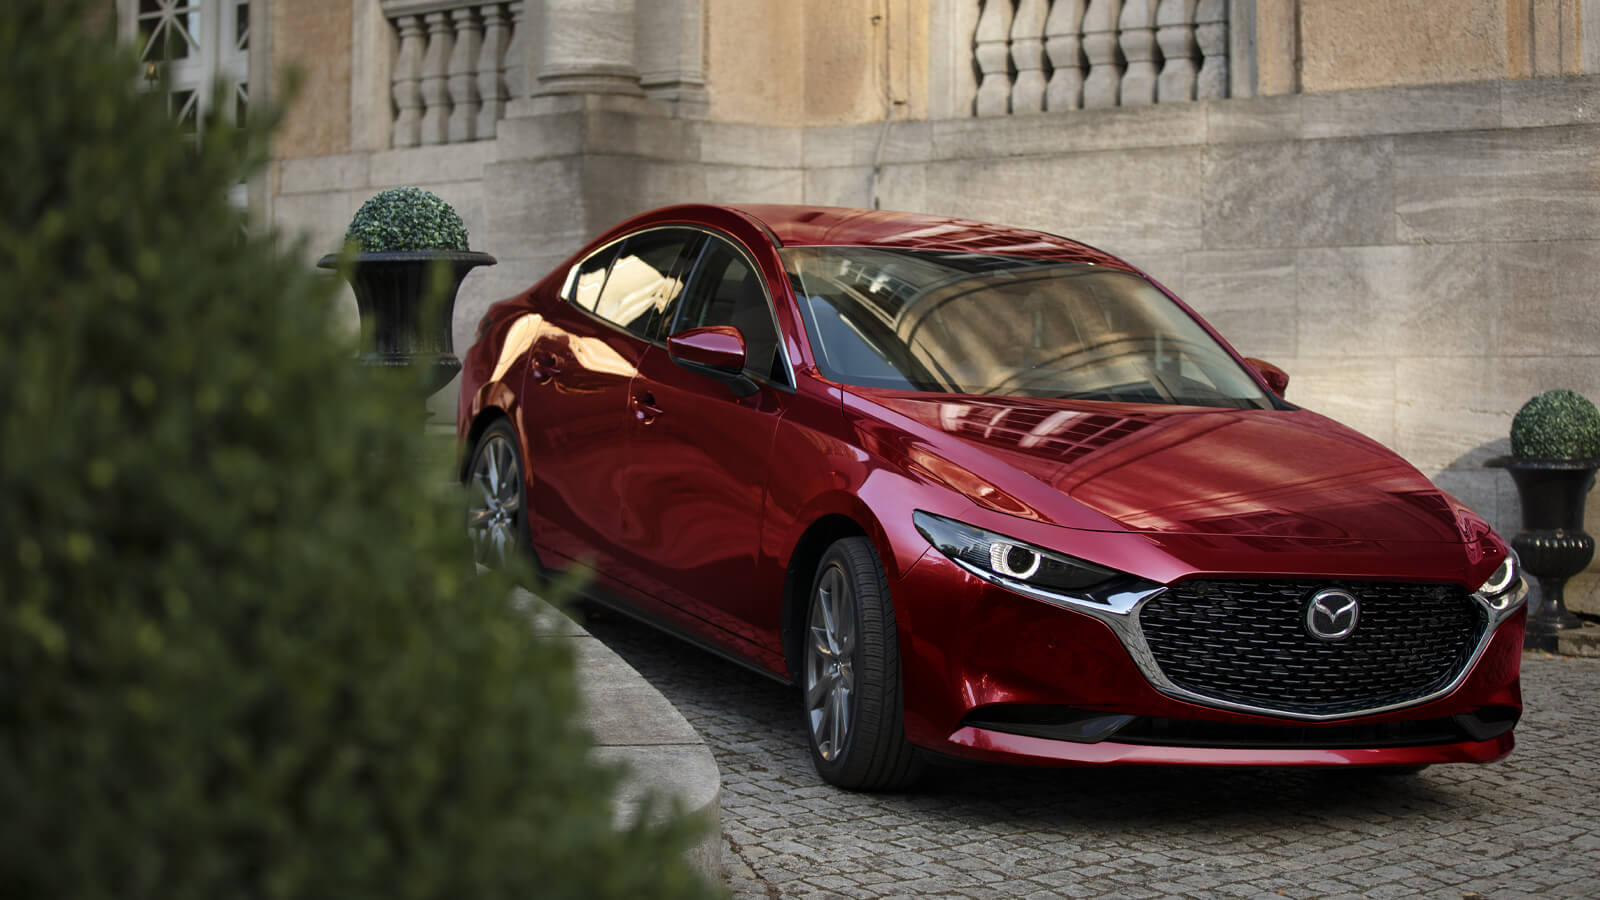 Soul Red Crystal Metallic Mazda3 sedan front ¾ shot, parked on cobblestone drive in front of a limestone historical building. 